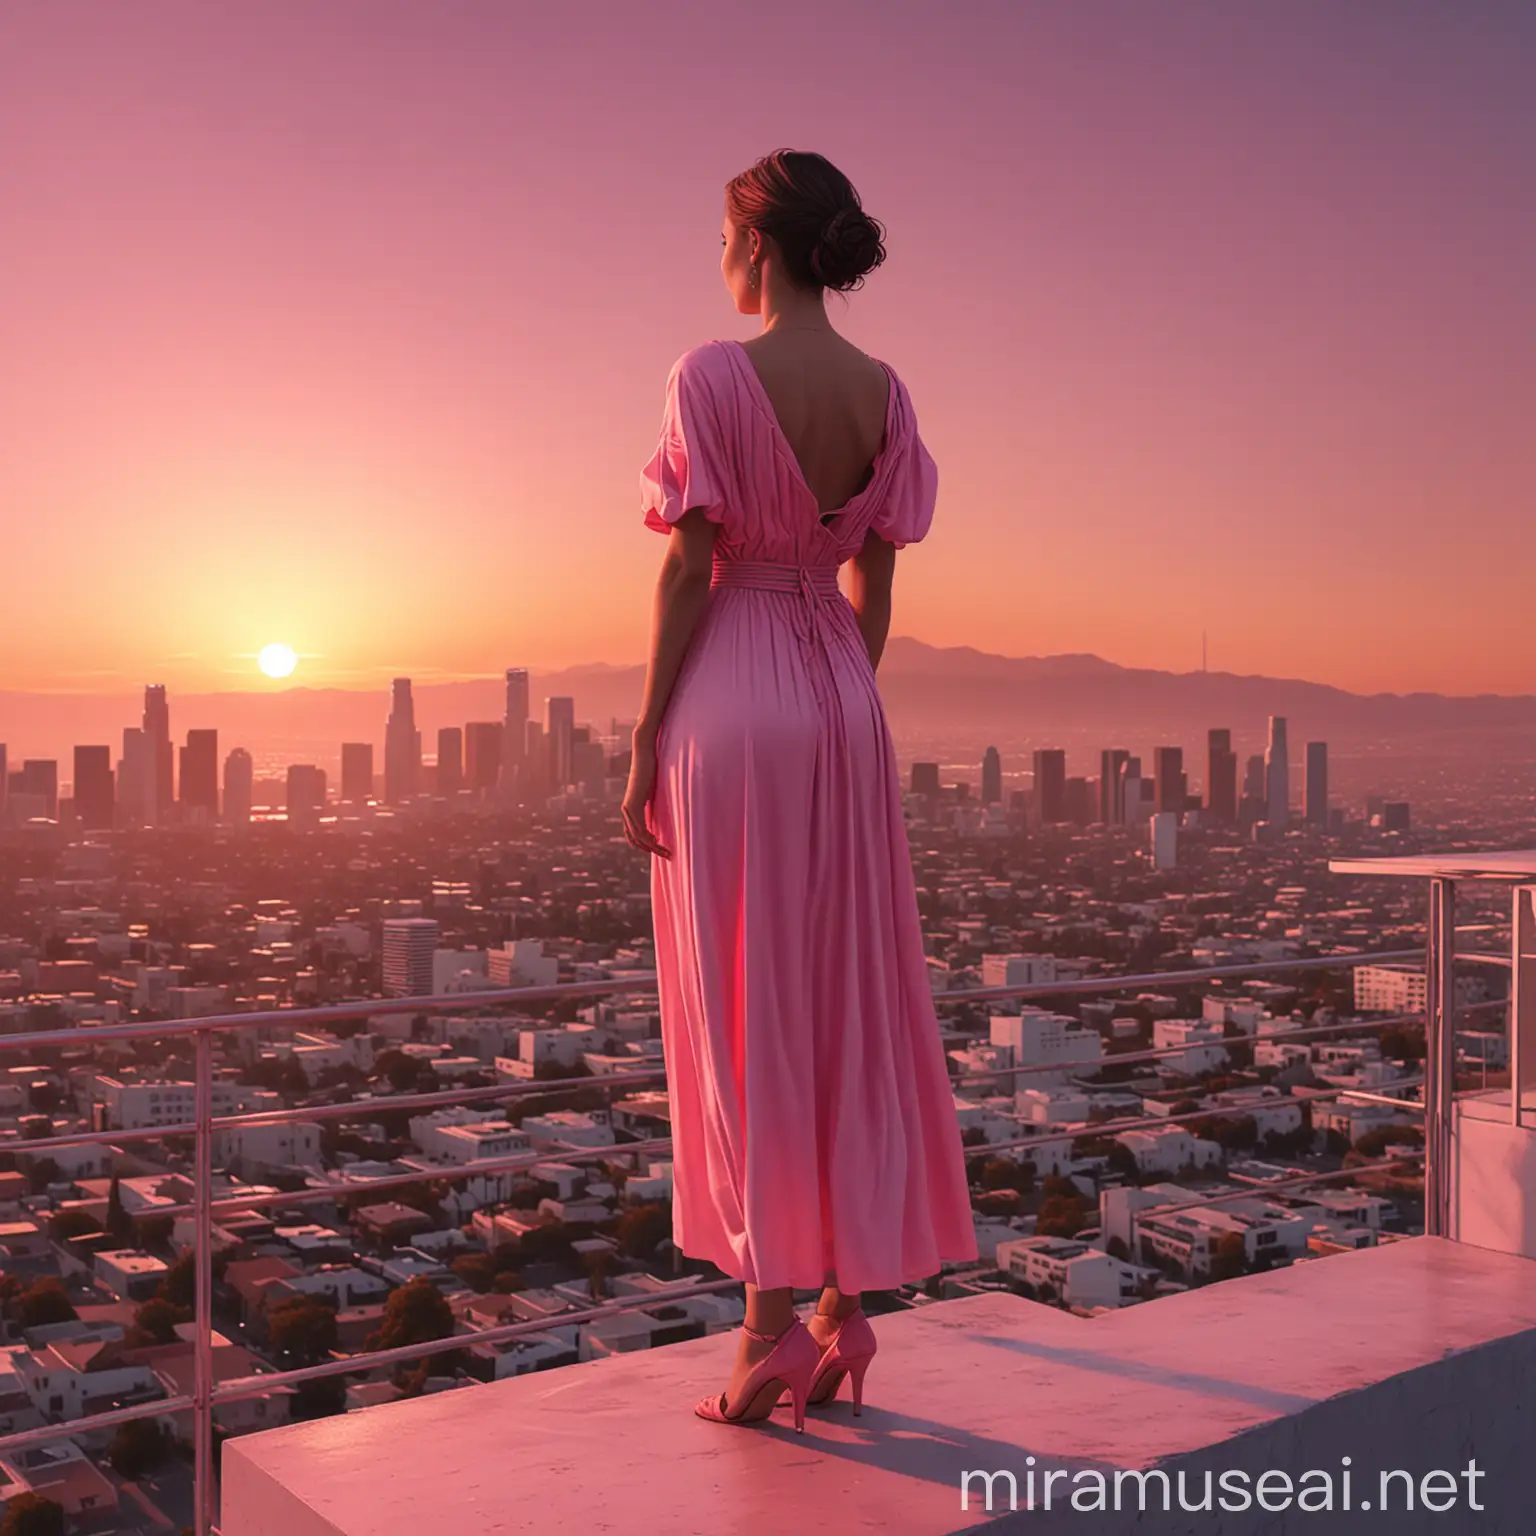 Woman in Bold Pink Dress Watching Hyper Realistic Sunset in Los Angeles